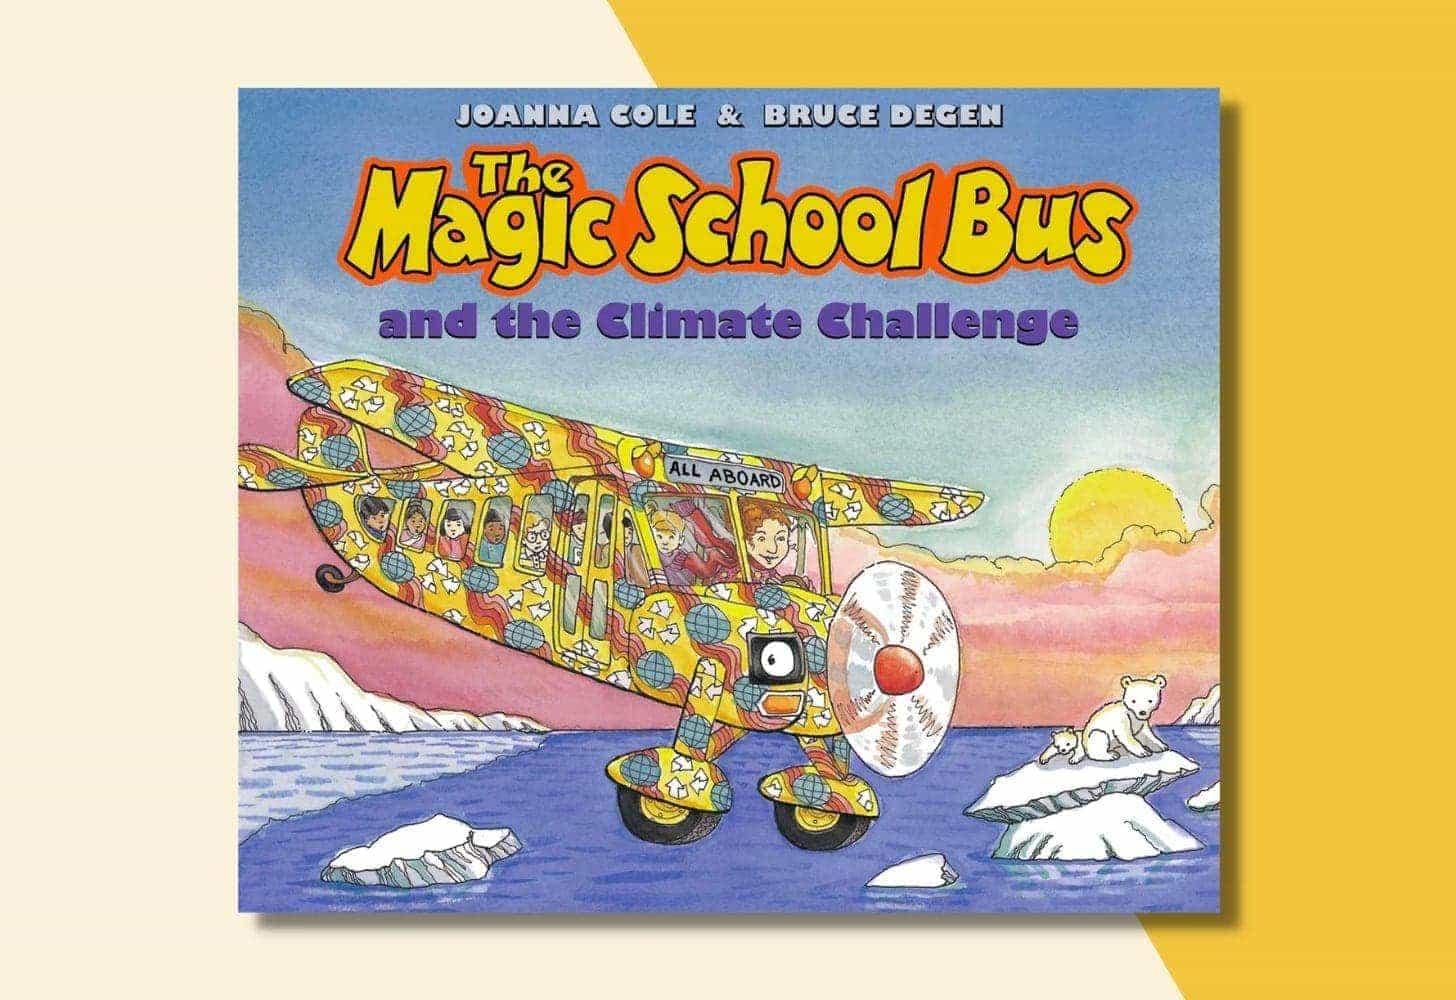 “The Magic School Bus and the Climate Challenge” by Joanna Cole